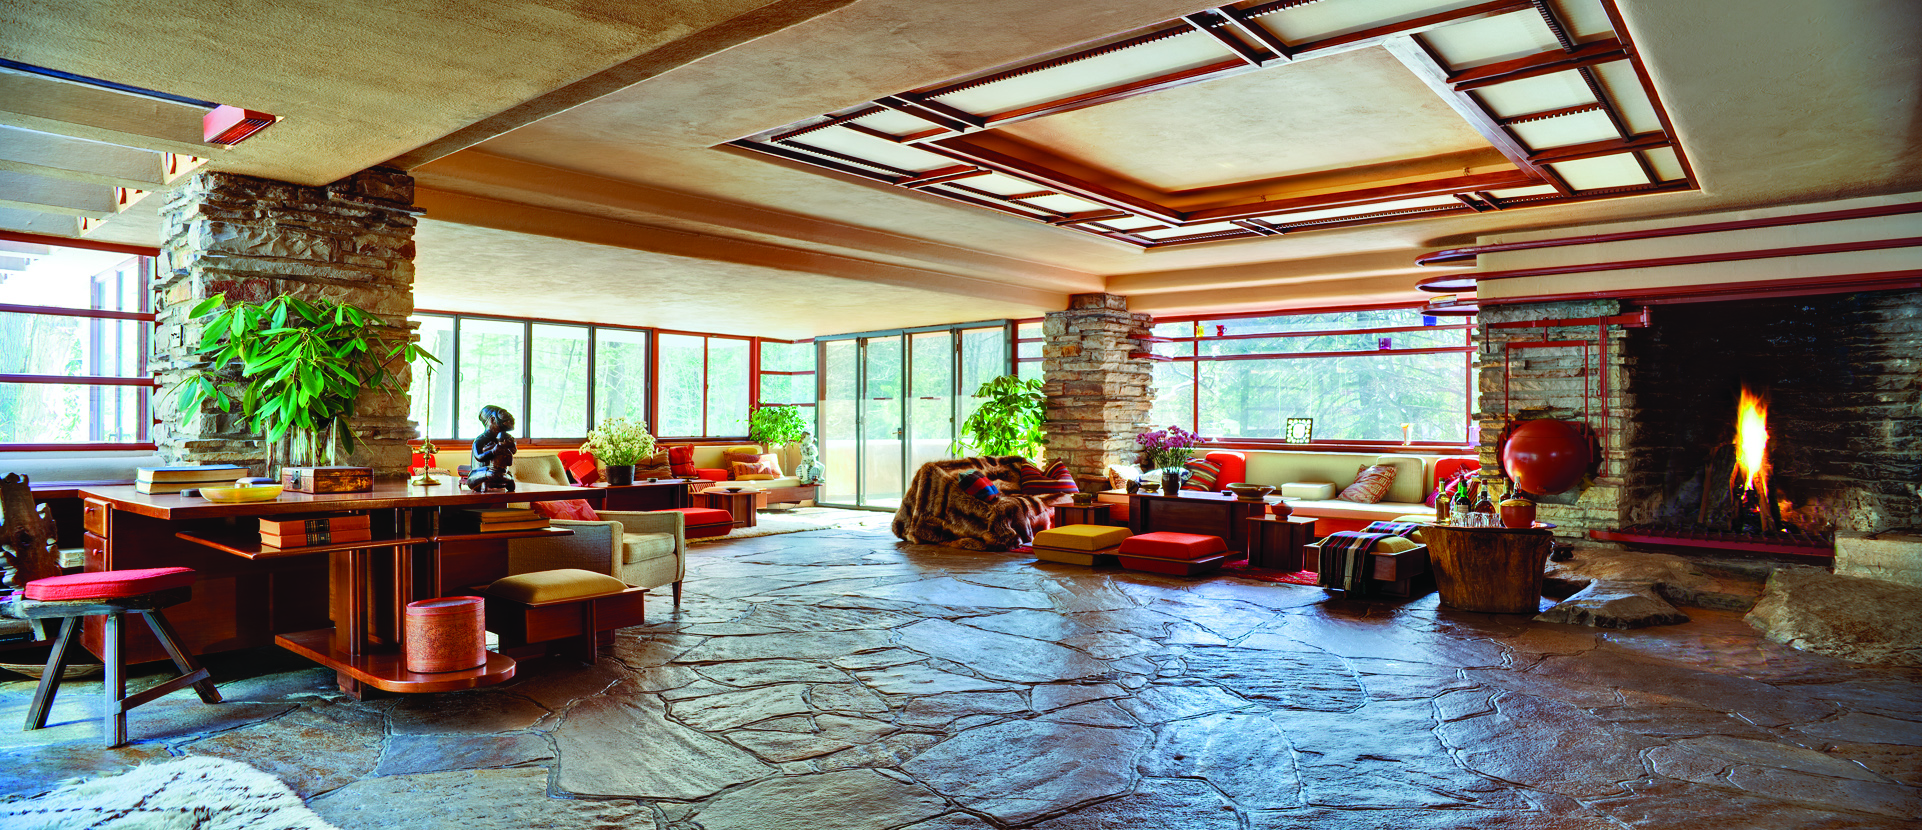 Frank Lloyd Wright S Fallingwater Lets In The Light With Low Iron Glass